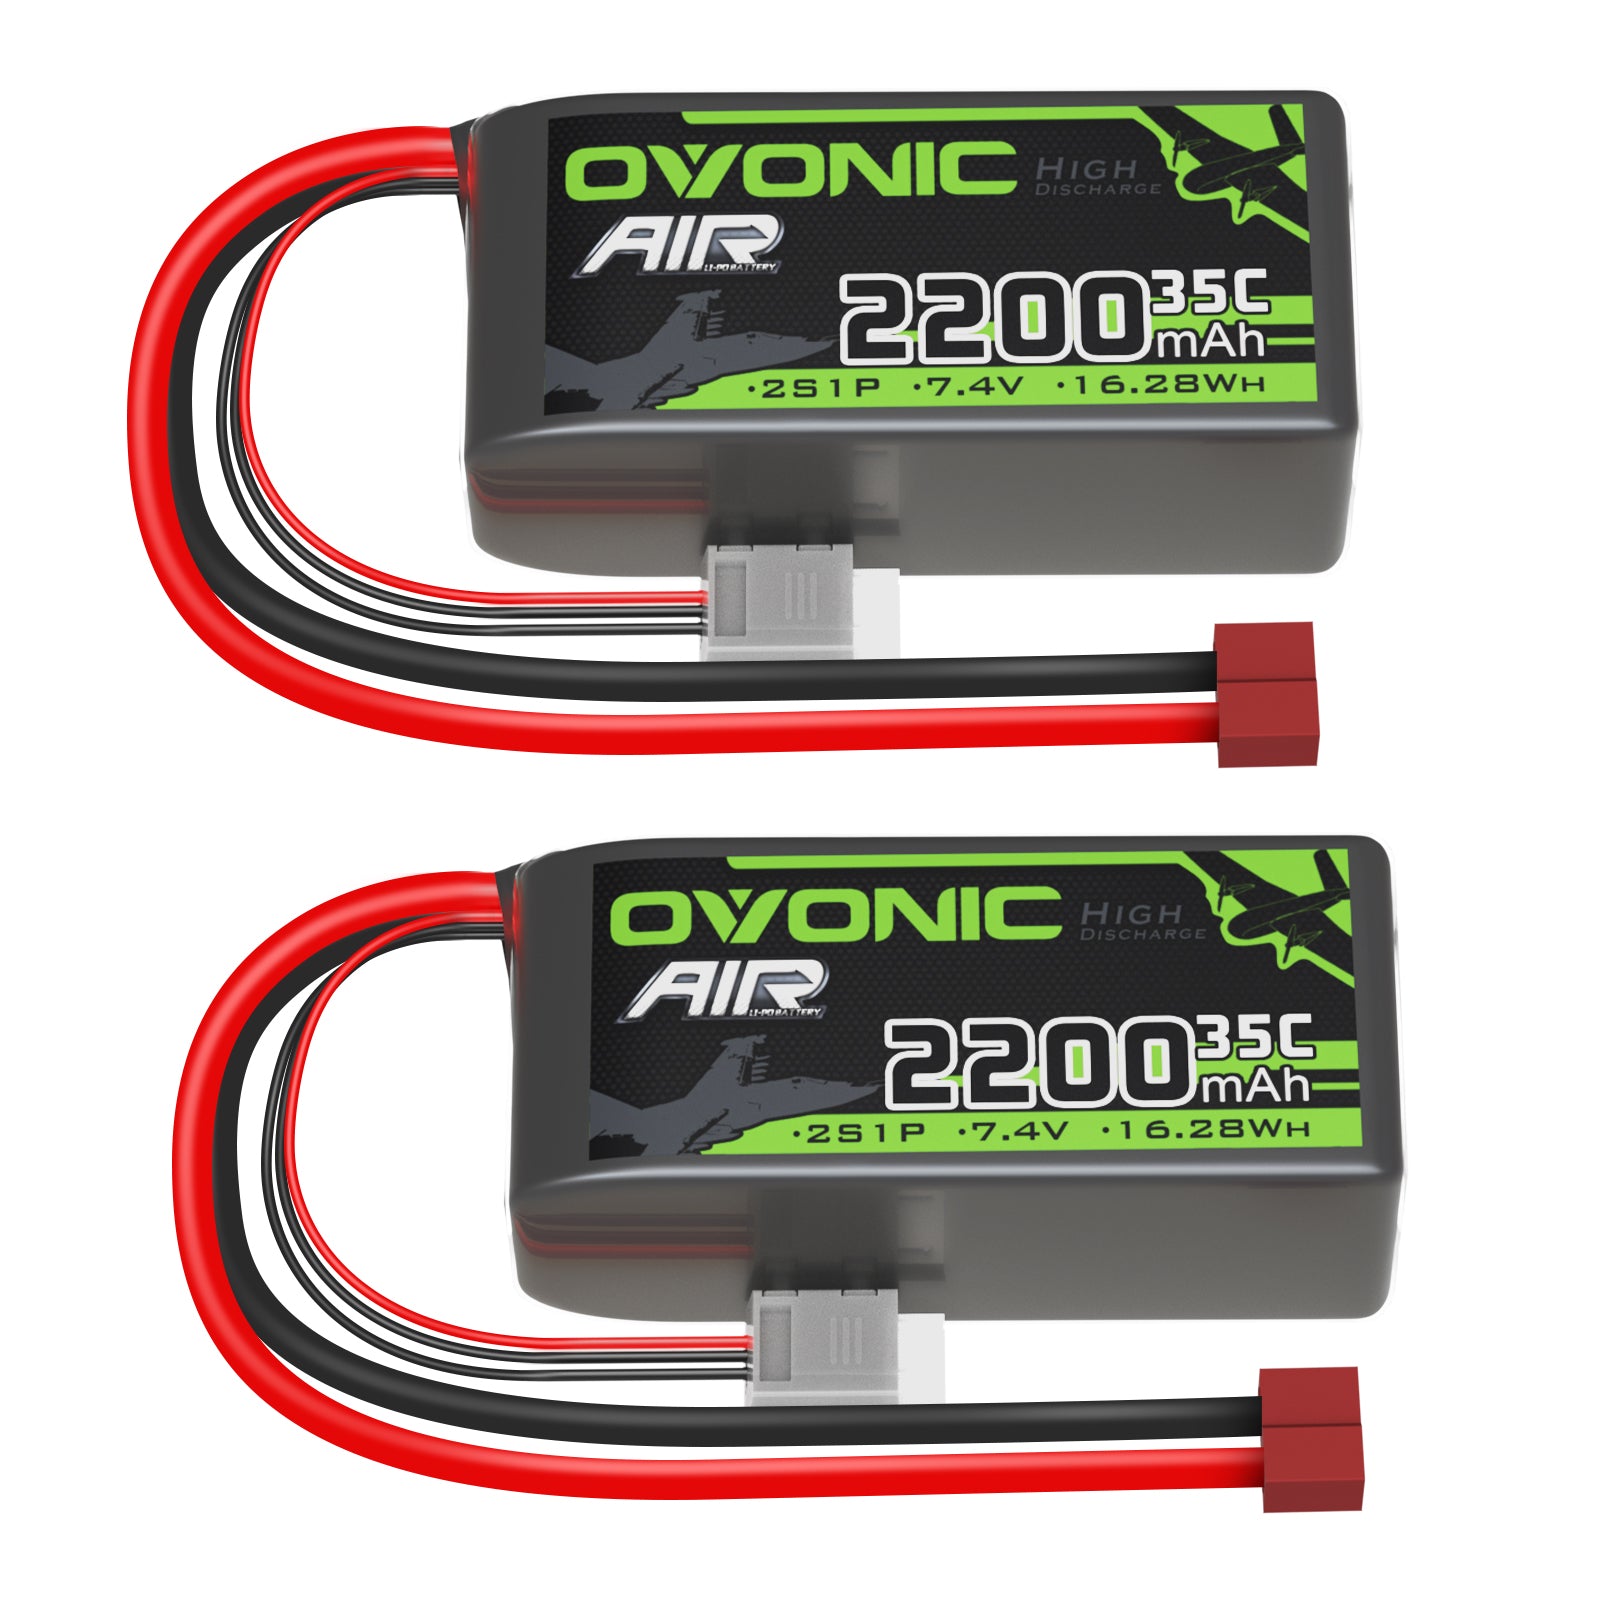 2×OVONIC 2S 35C 7.4V 2200mAh Short LiPo Battery Pack with T Plug For Airplane Helicopter